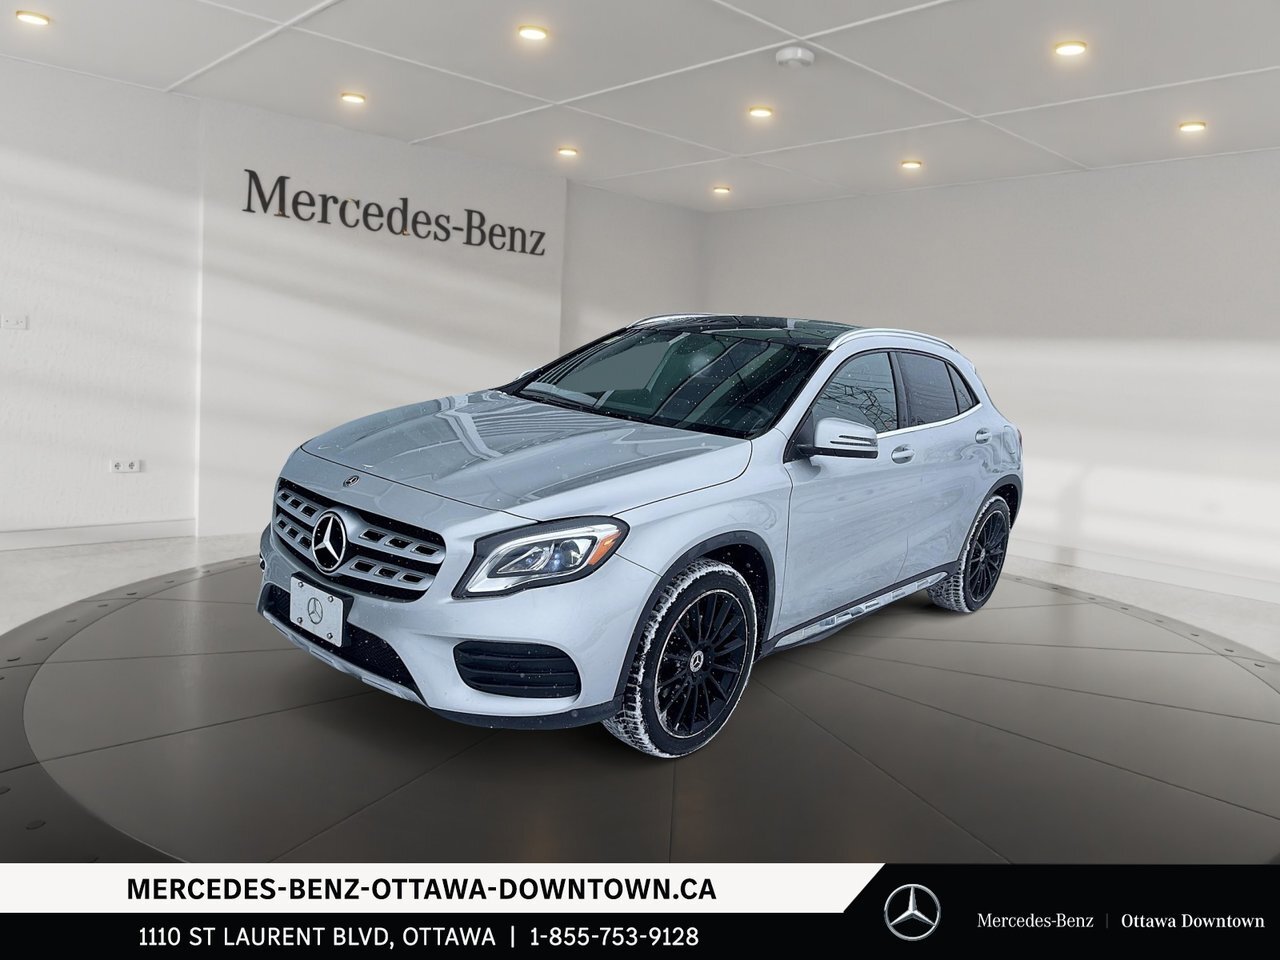 2018 Mercedes-Benz GLA250 4MATIC SUV- Sport pkg with 19 AMG rims ONe owner w